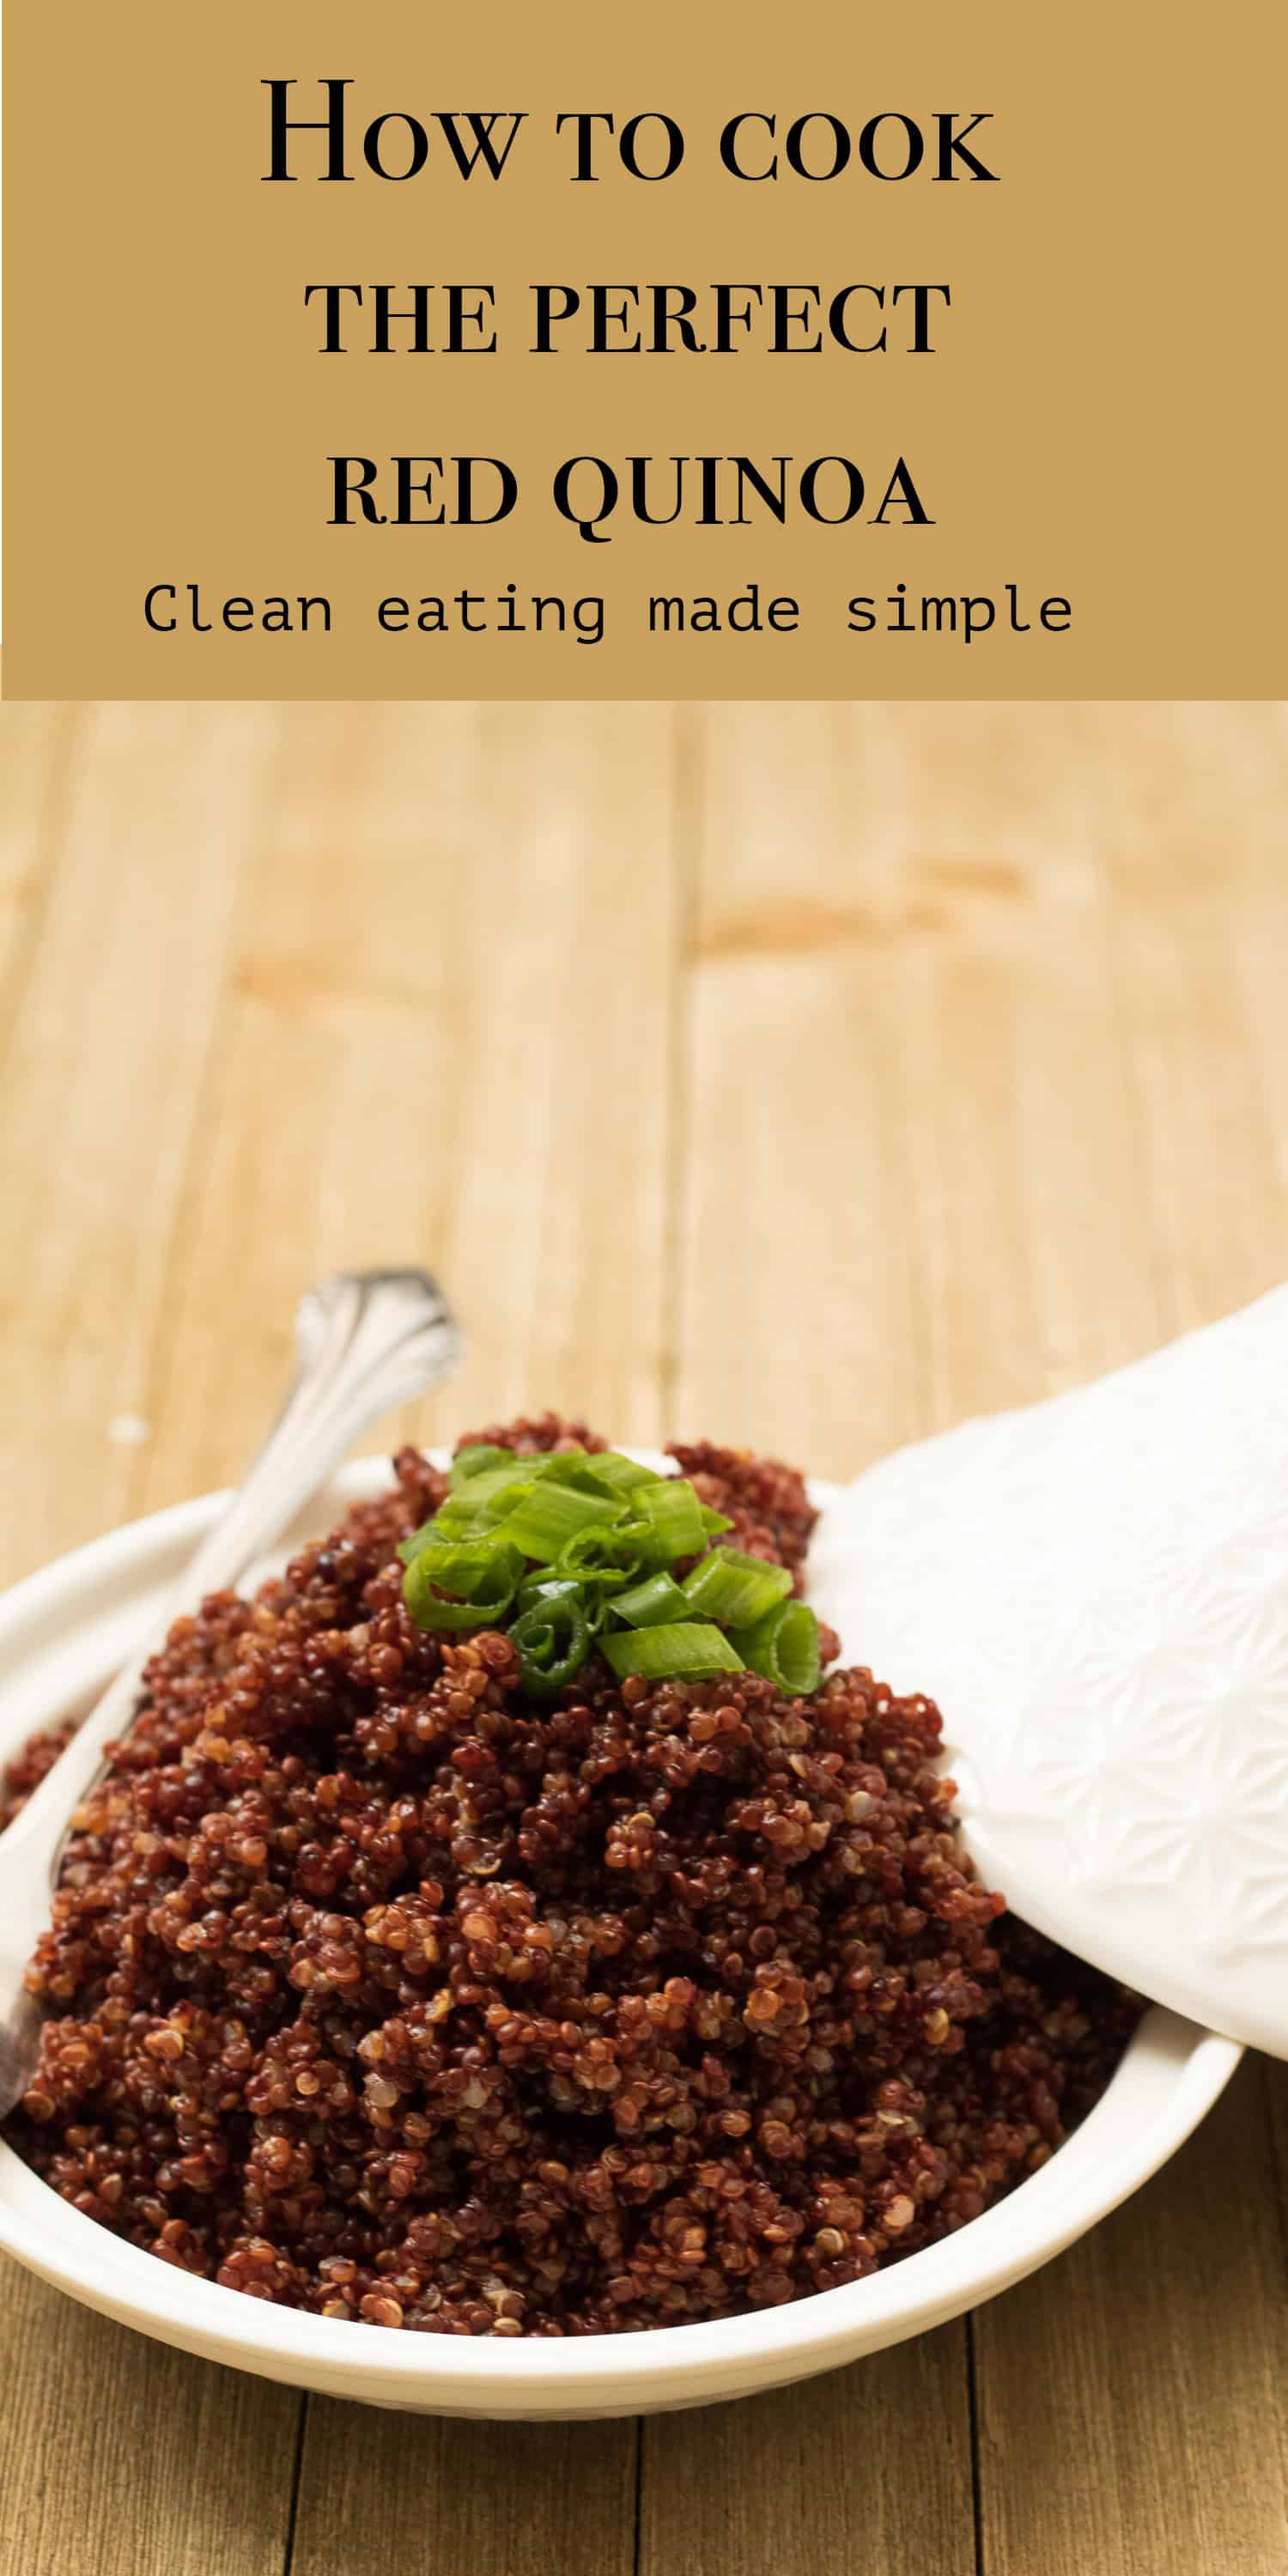 How to Cook Red Quinoa perfectly! Lifestyle of Foodie